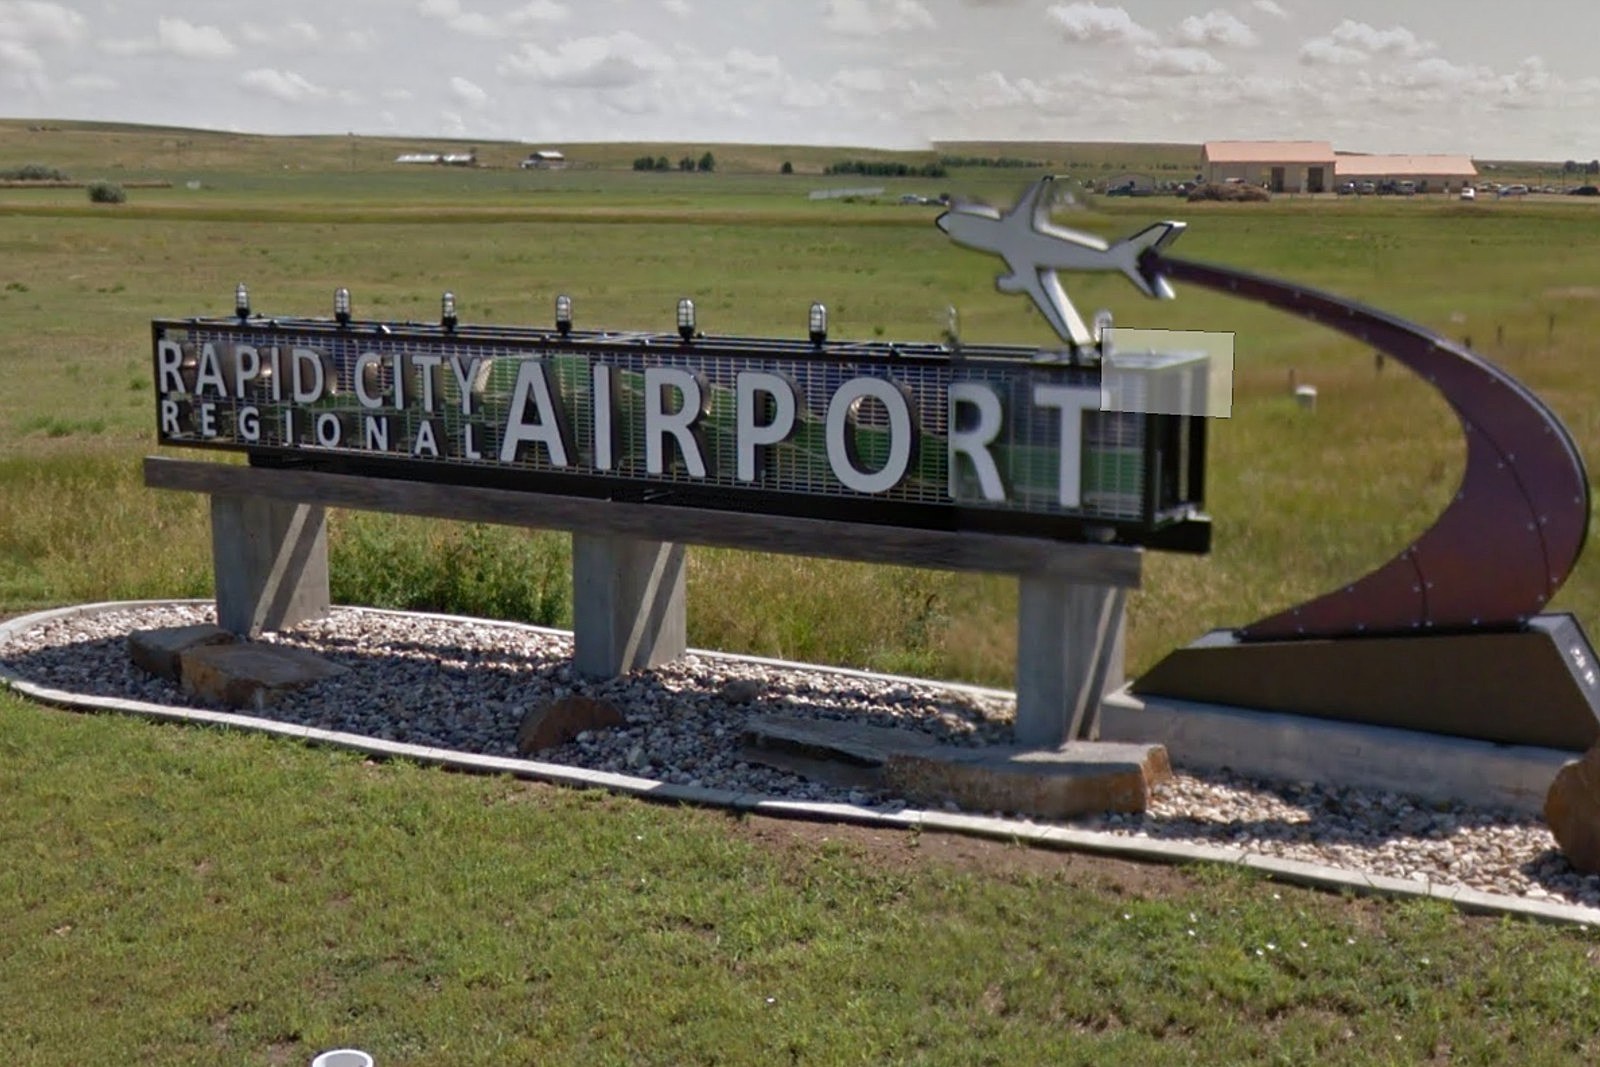 is there an airport in rapid city sd?